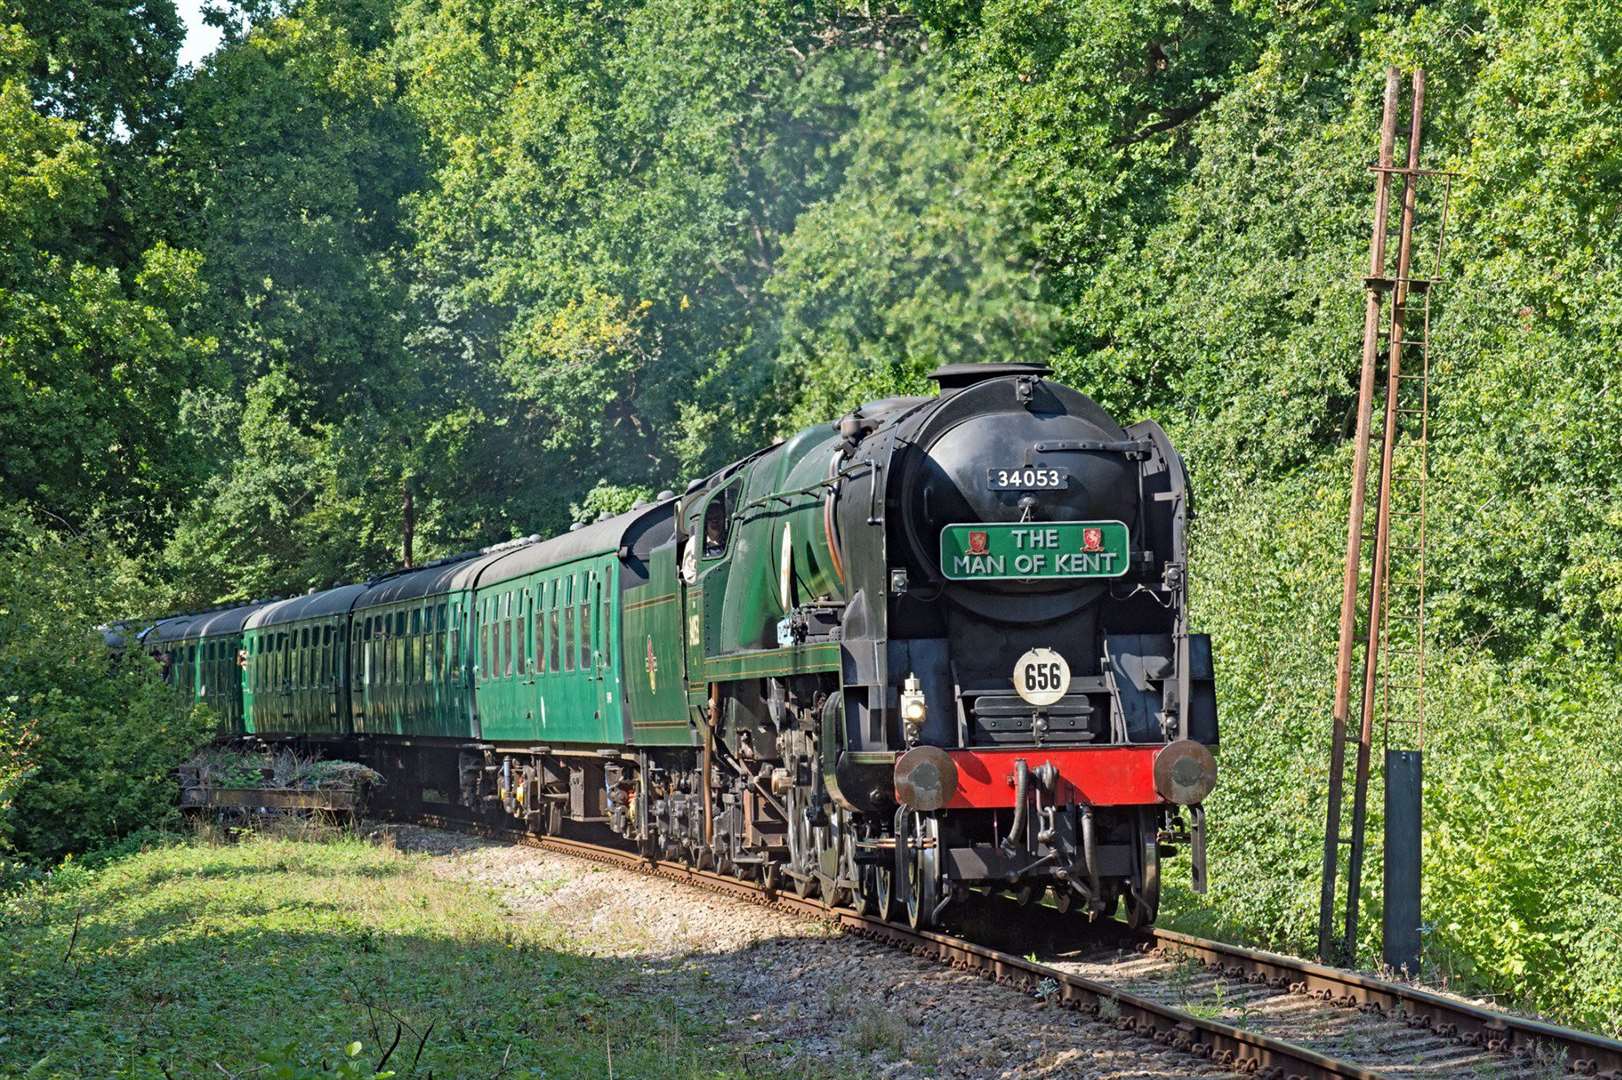 The Spa Valley Railway is launching the new service Picture: Spa Valley Railway